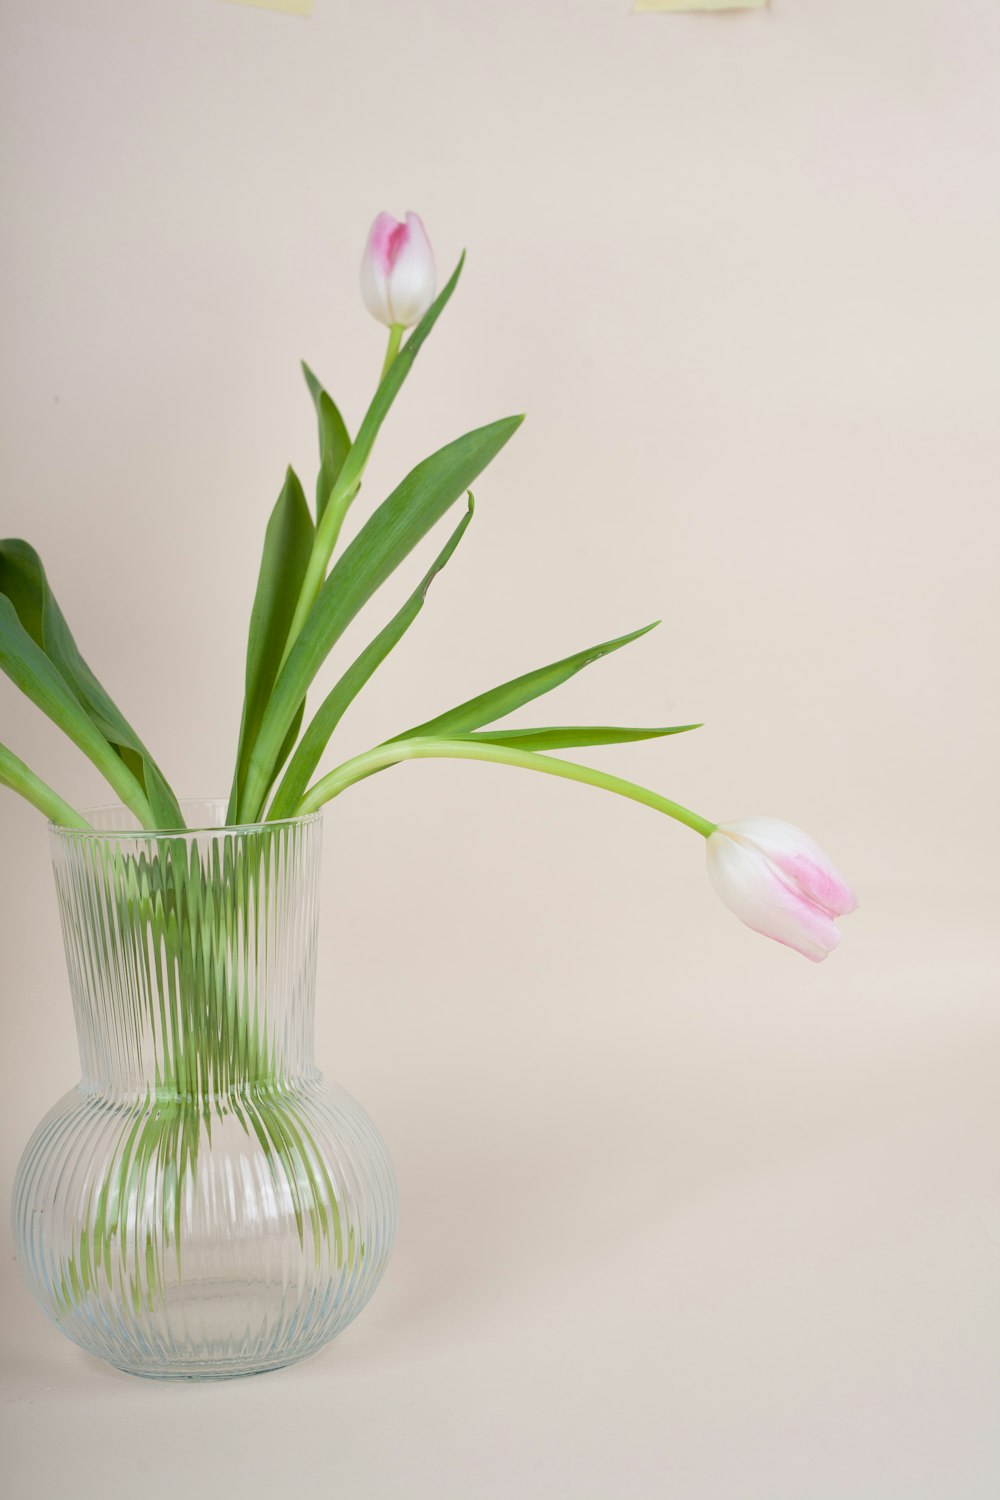 a glass vase filled with pink and white tulips